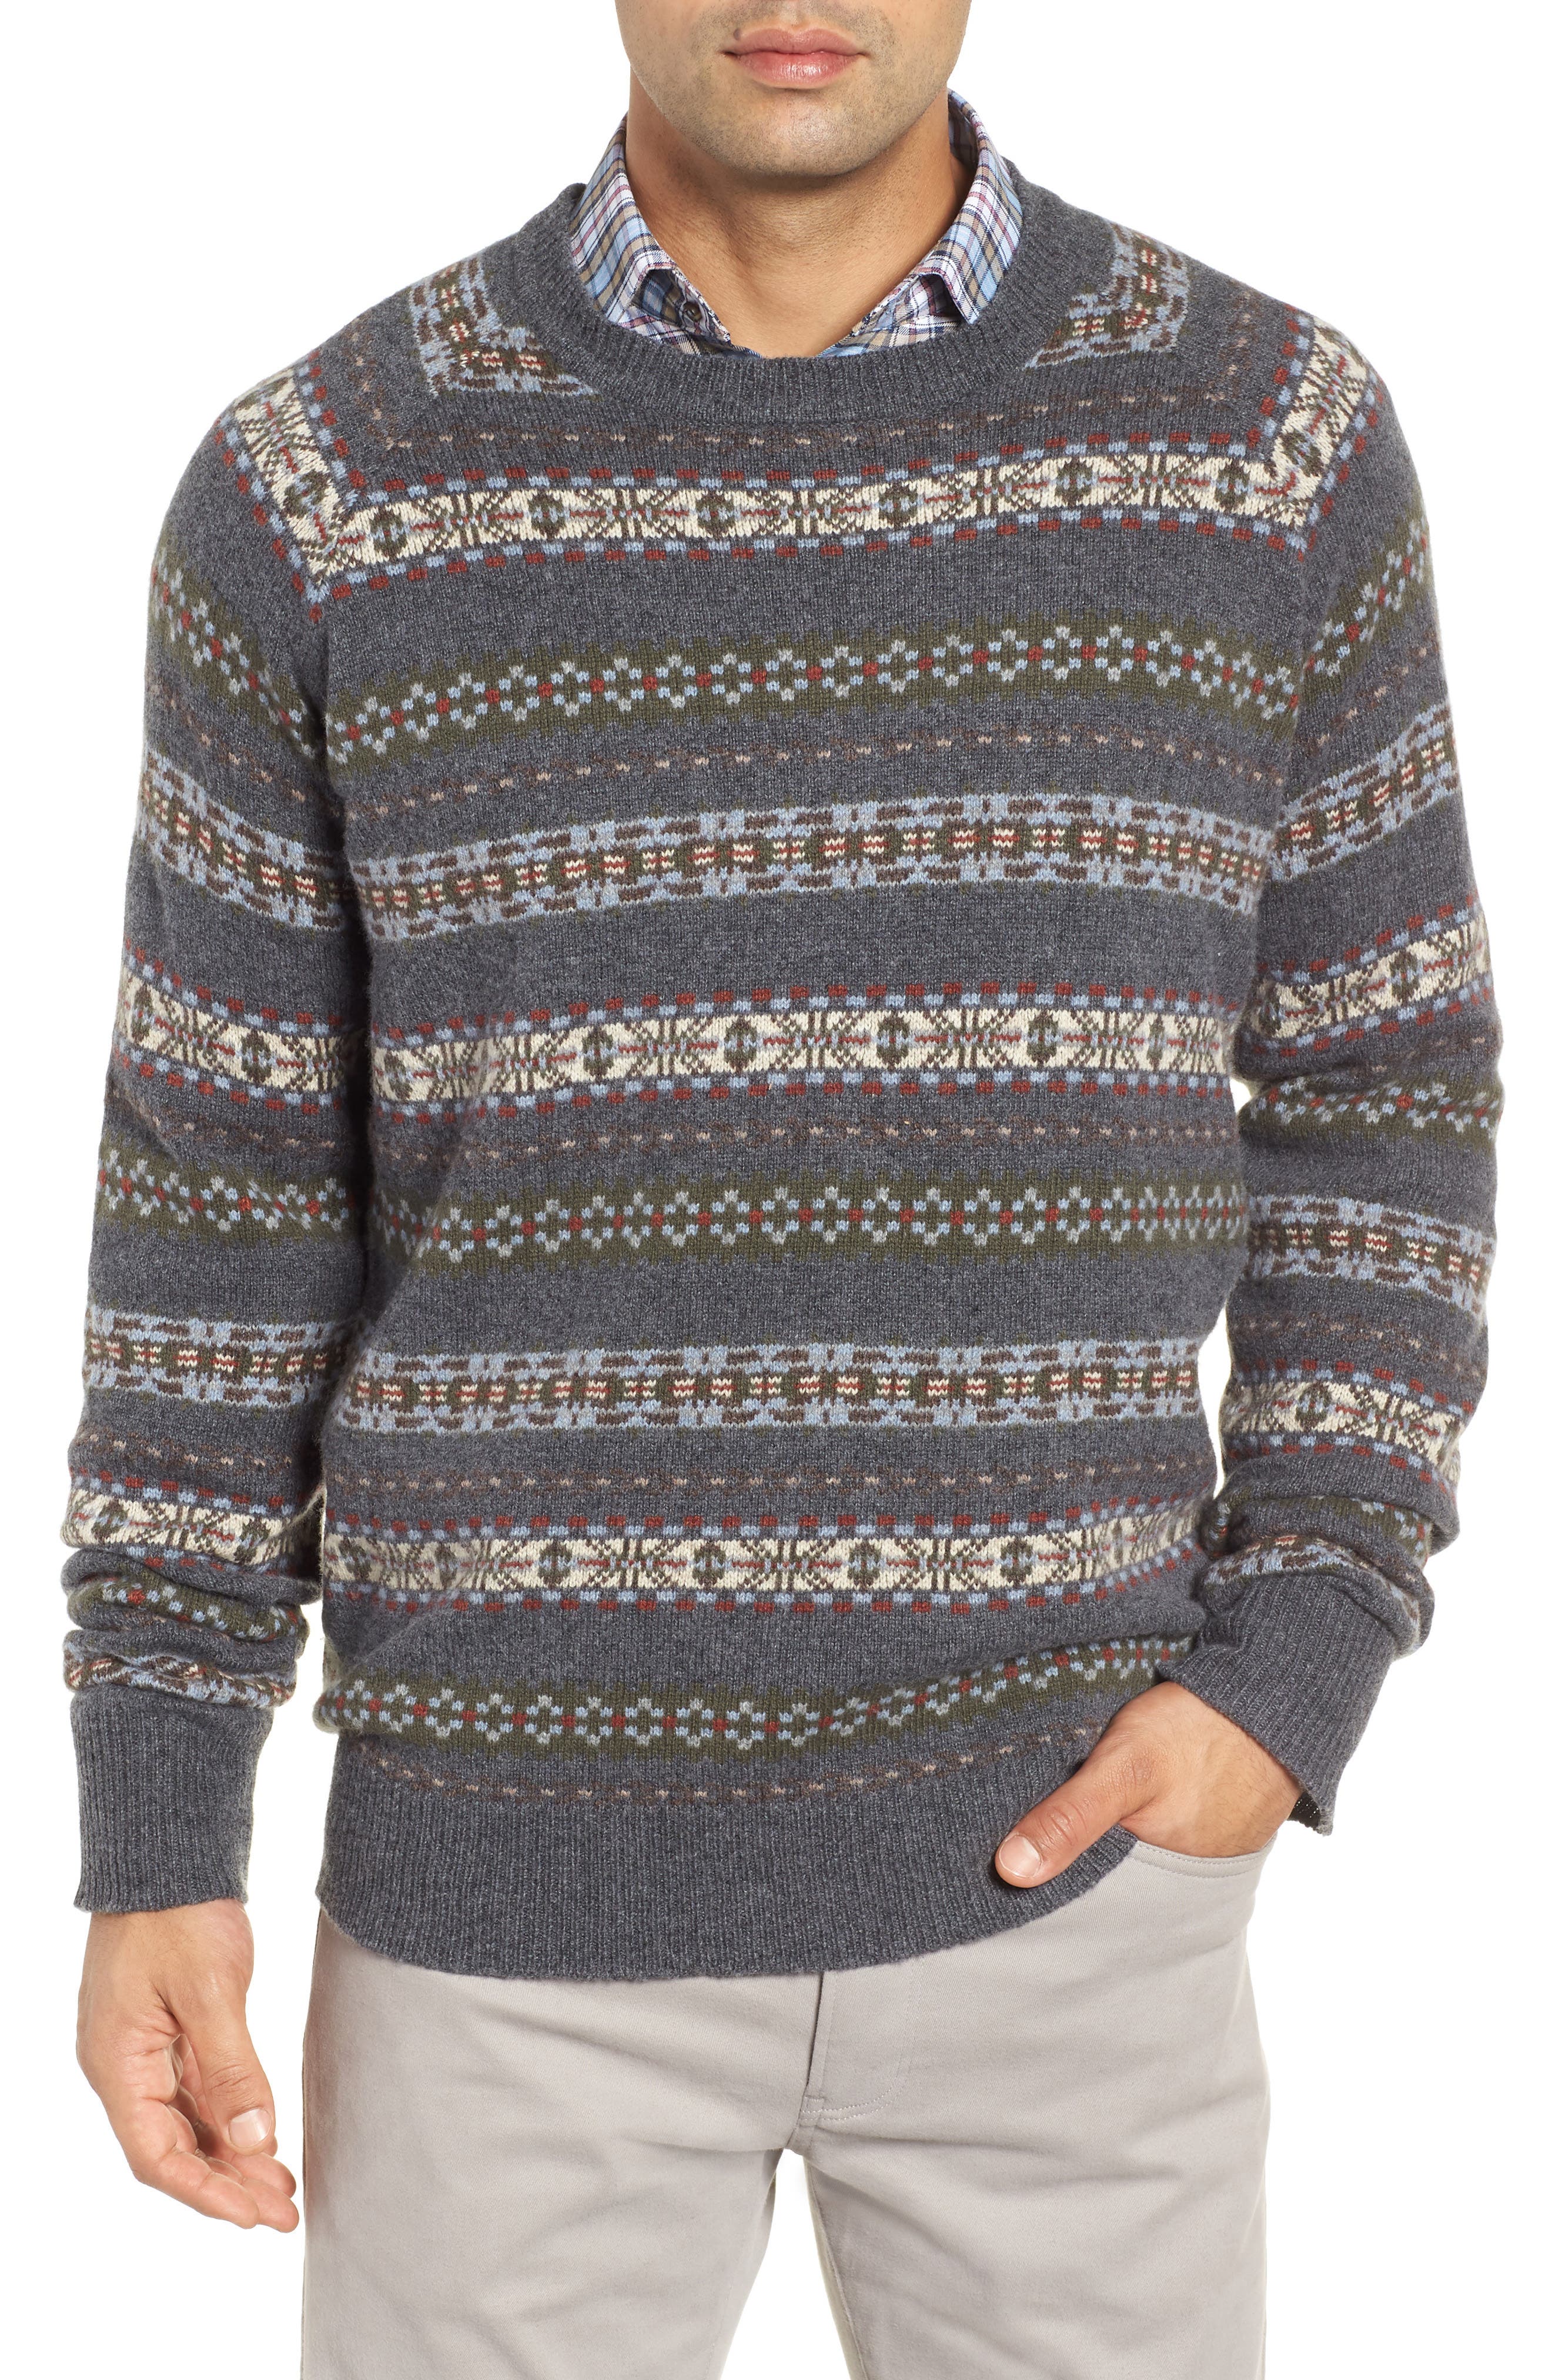 1920s Mens Sweaters, Pullovers, Cardigans